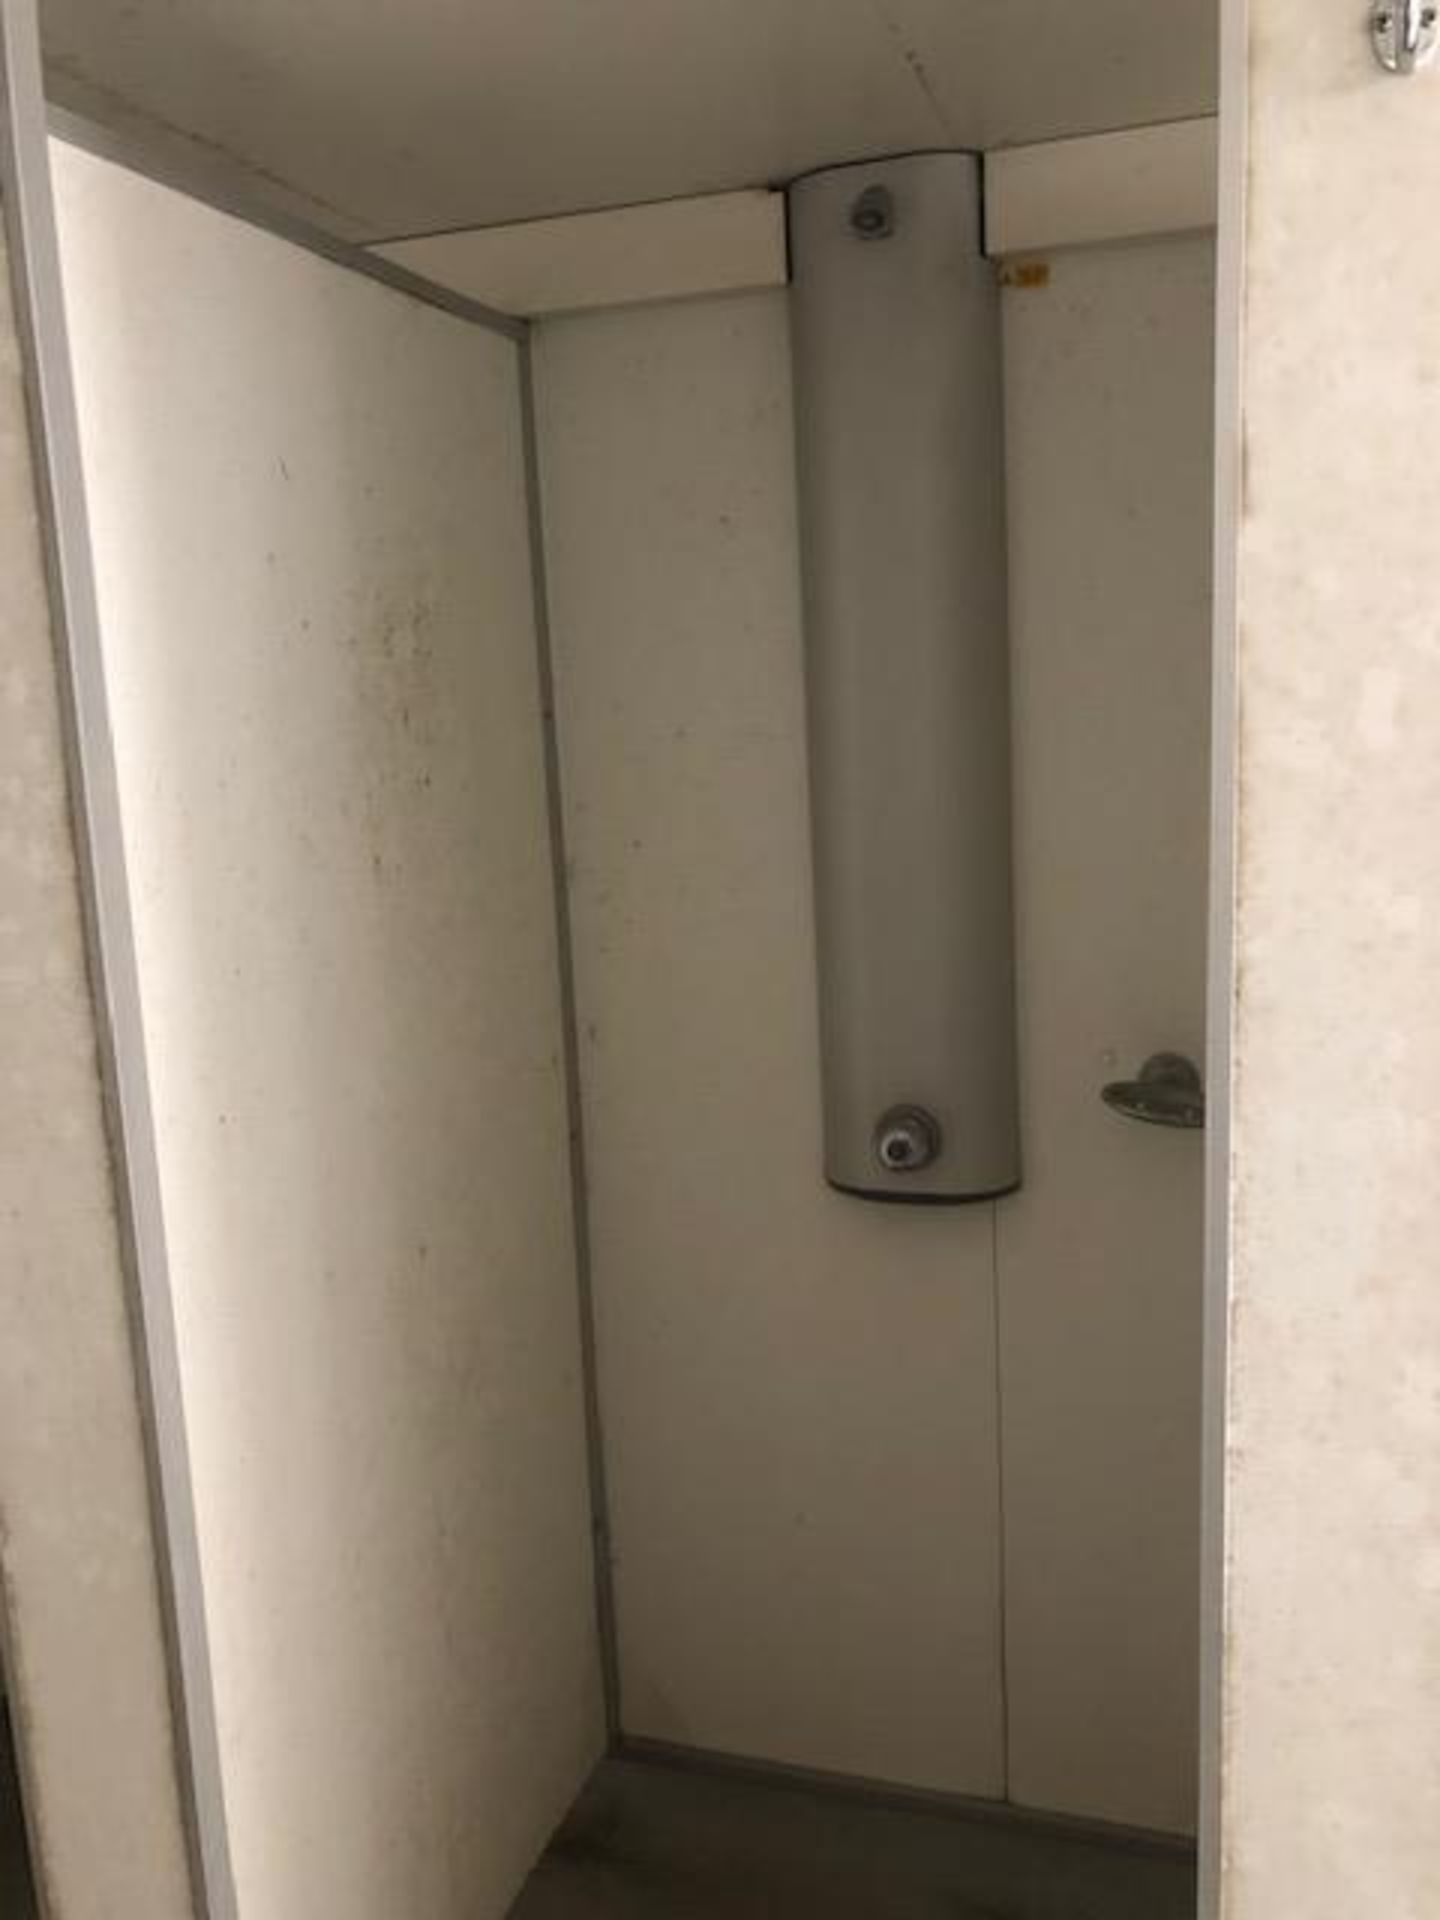 Frontline toilet and shower block unit - Image 20 of 28